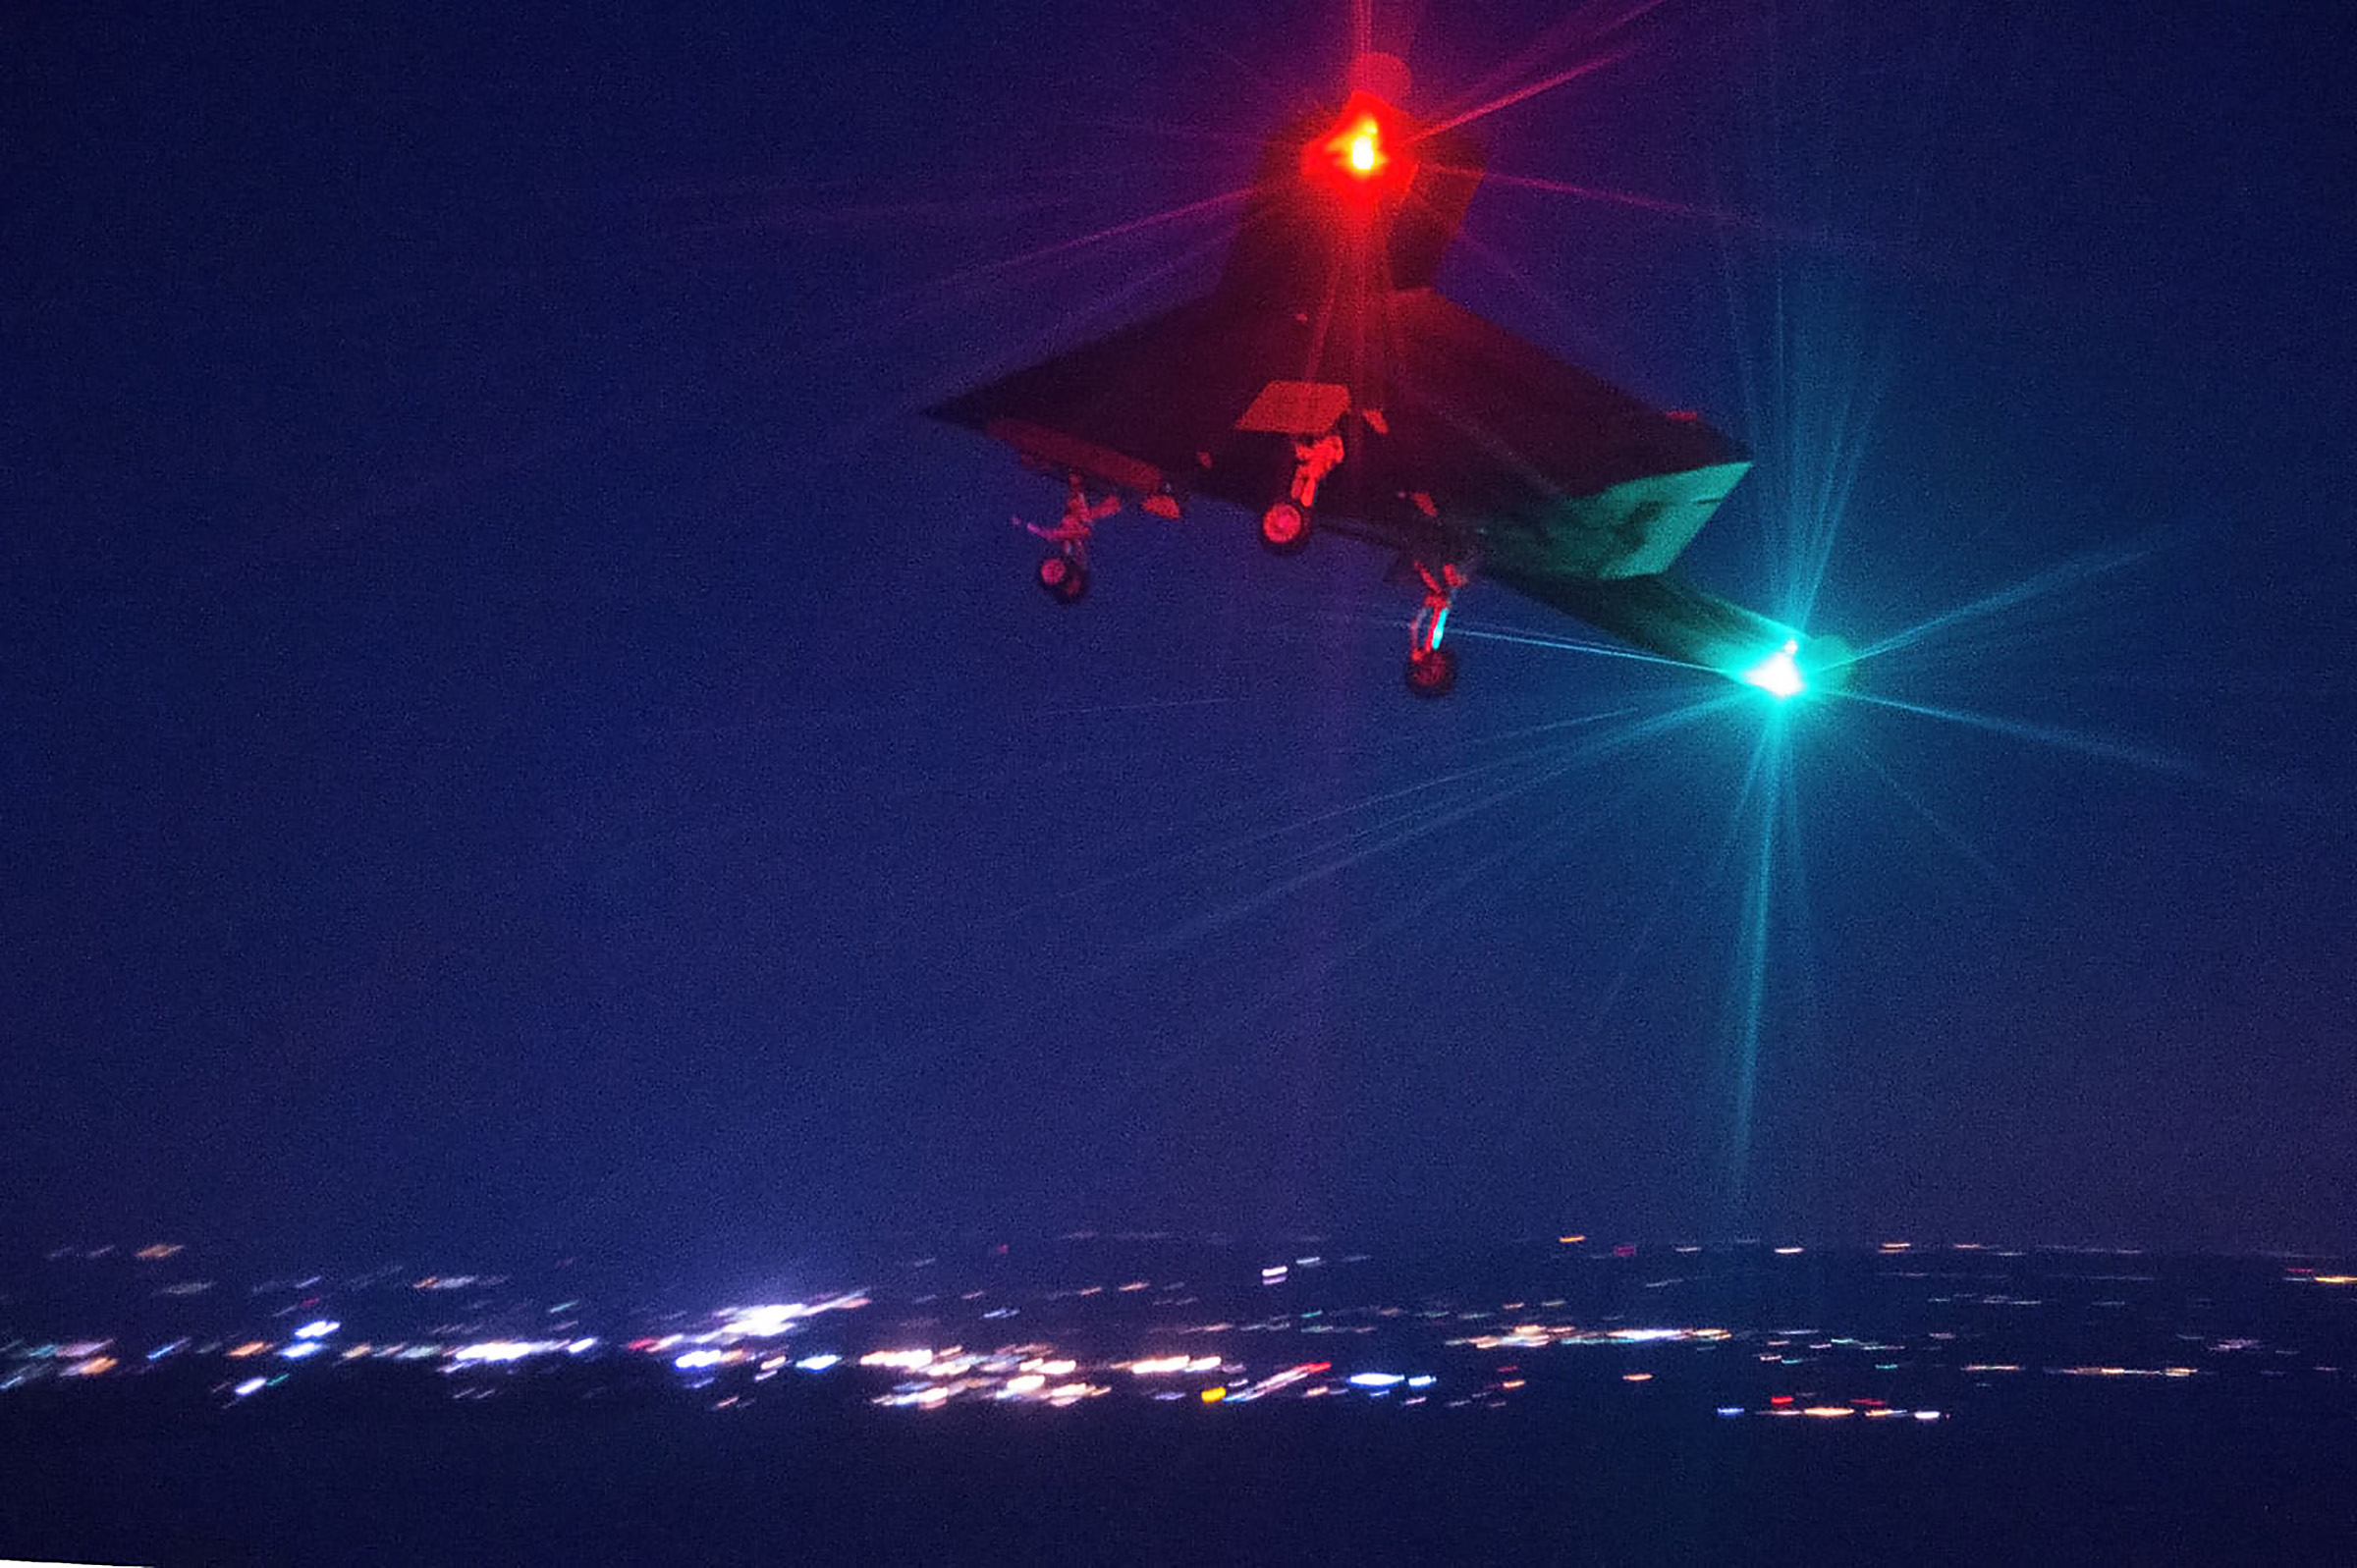 X-47B conducts its first night flight April 10 over Naval Air Station Patuxent River, Md. on April, 10 2014. US Navy Photo